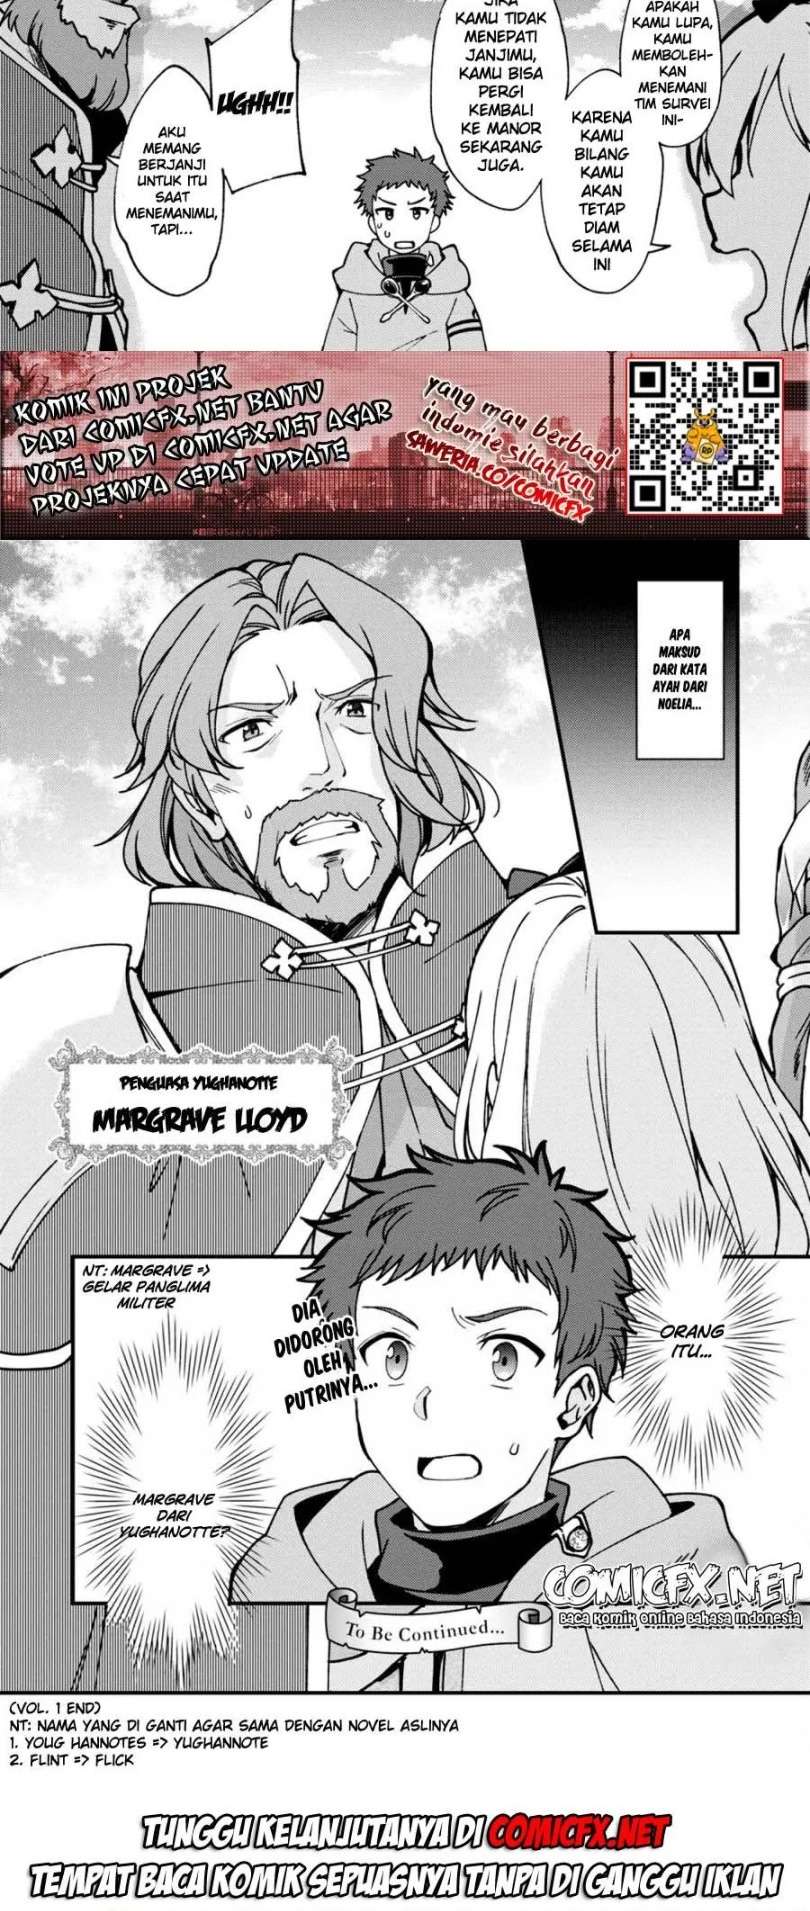 A Sword Master Childhood Friend Power Harassed Me Harshly, So I Broke off Our Relationship and Make a Fresh Start at the Frontier as a Magic Swordsman Chapter 05.2